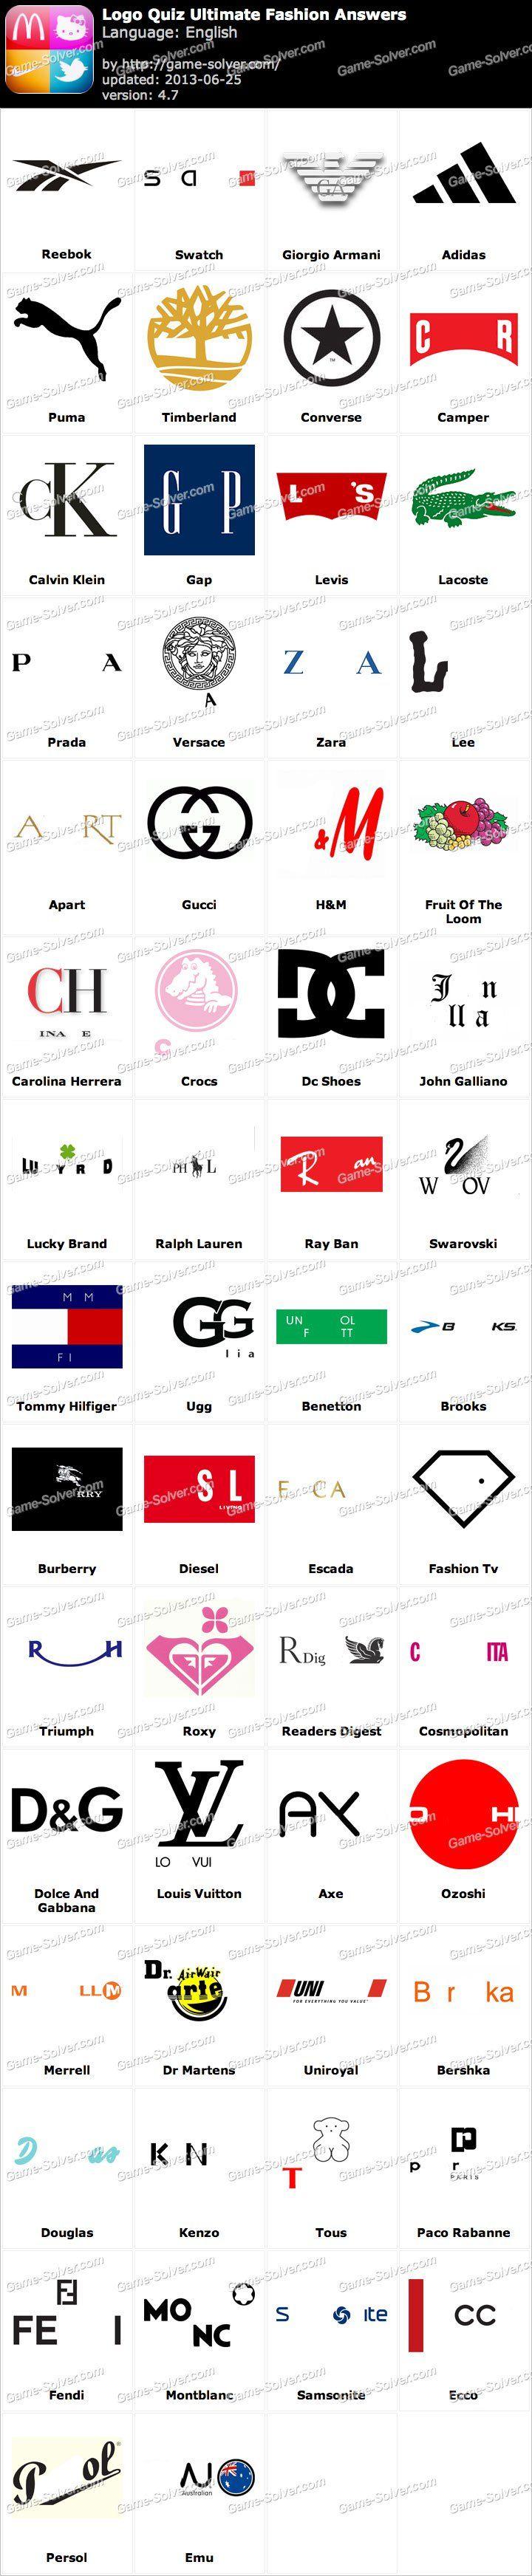 Sports Clothing and Apparel Logo - Logo Quiz Ultimate Fashion Answers - Game Solver